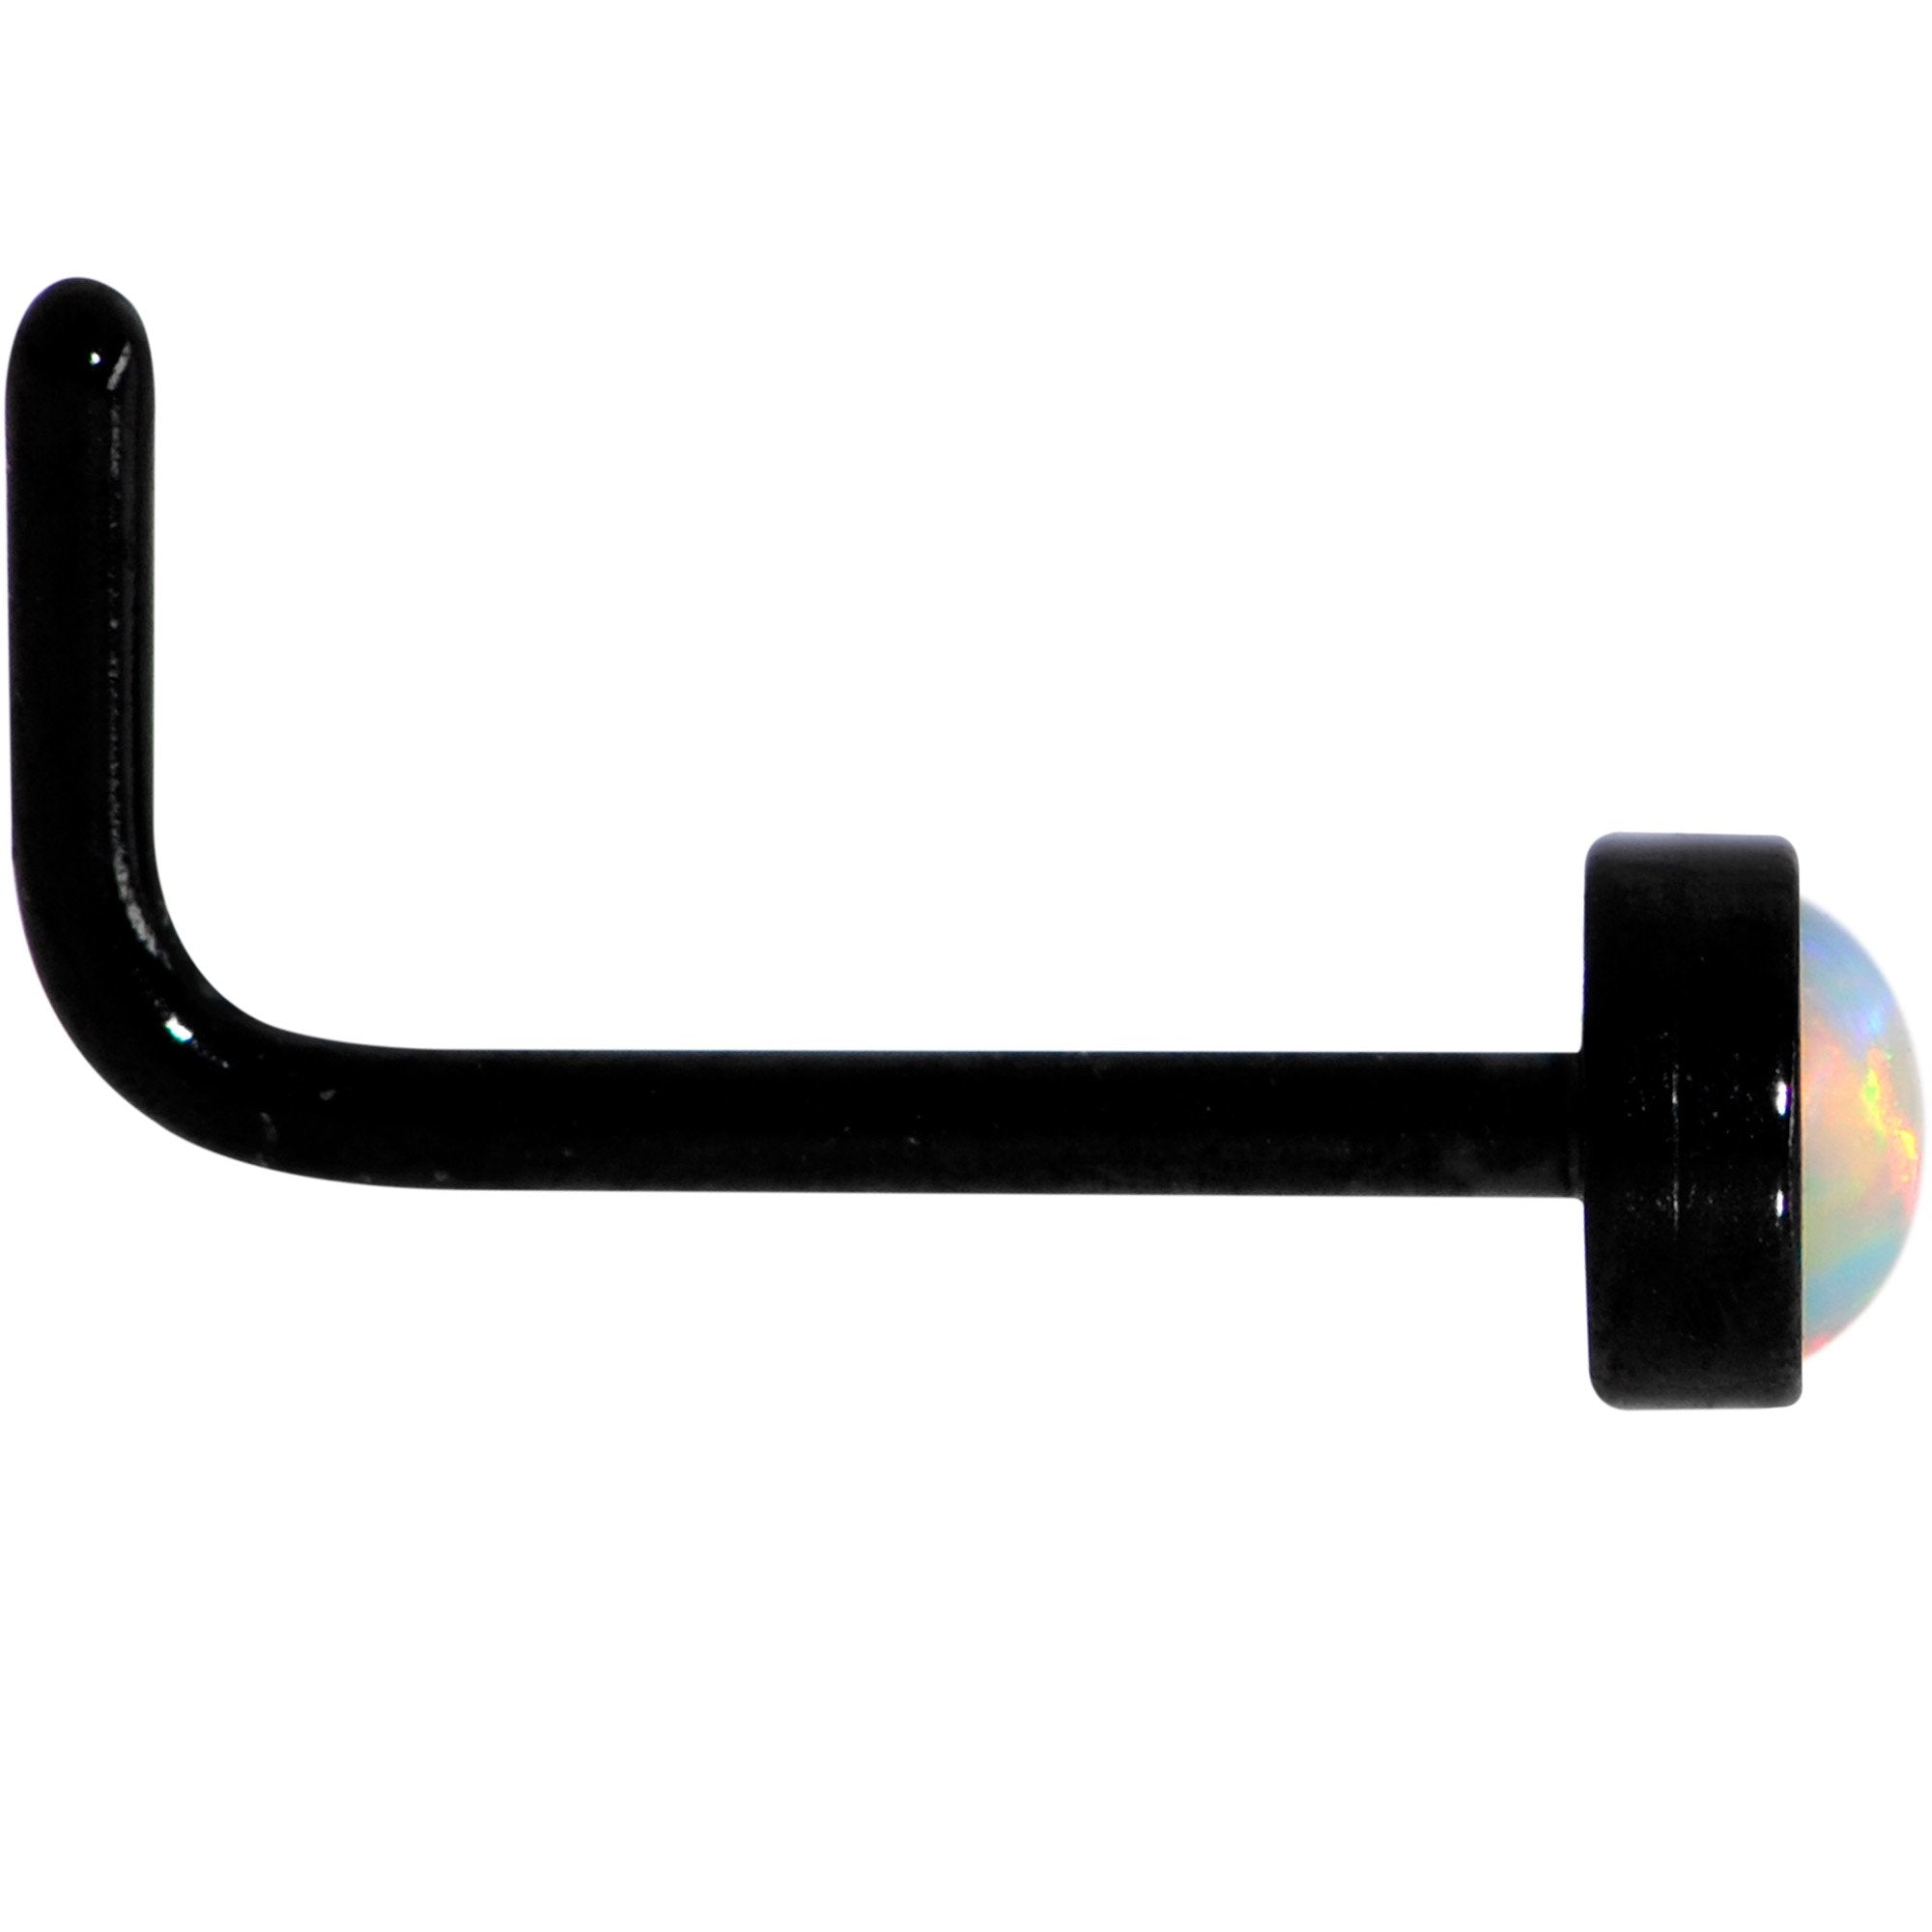 White 3mm Synthetic Opal Inlay Black Anodized L-Shape Nose Ring